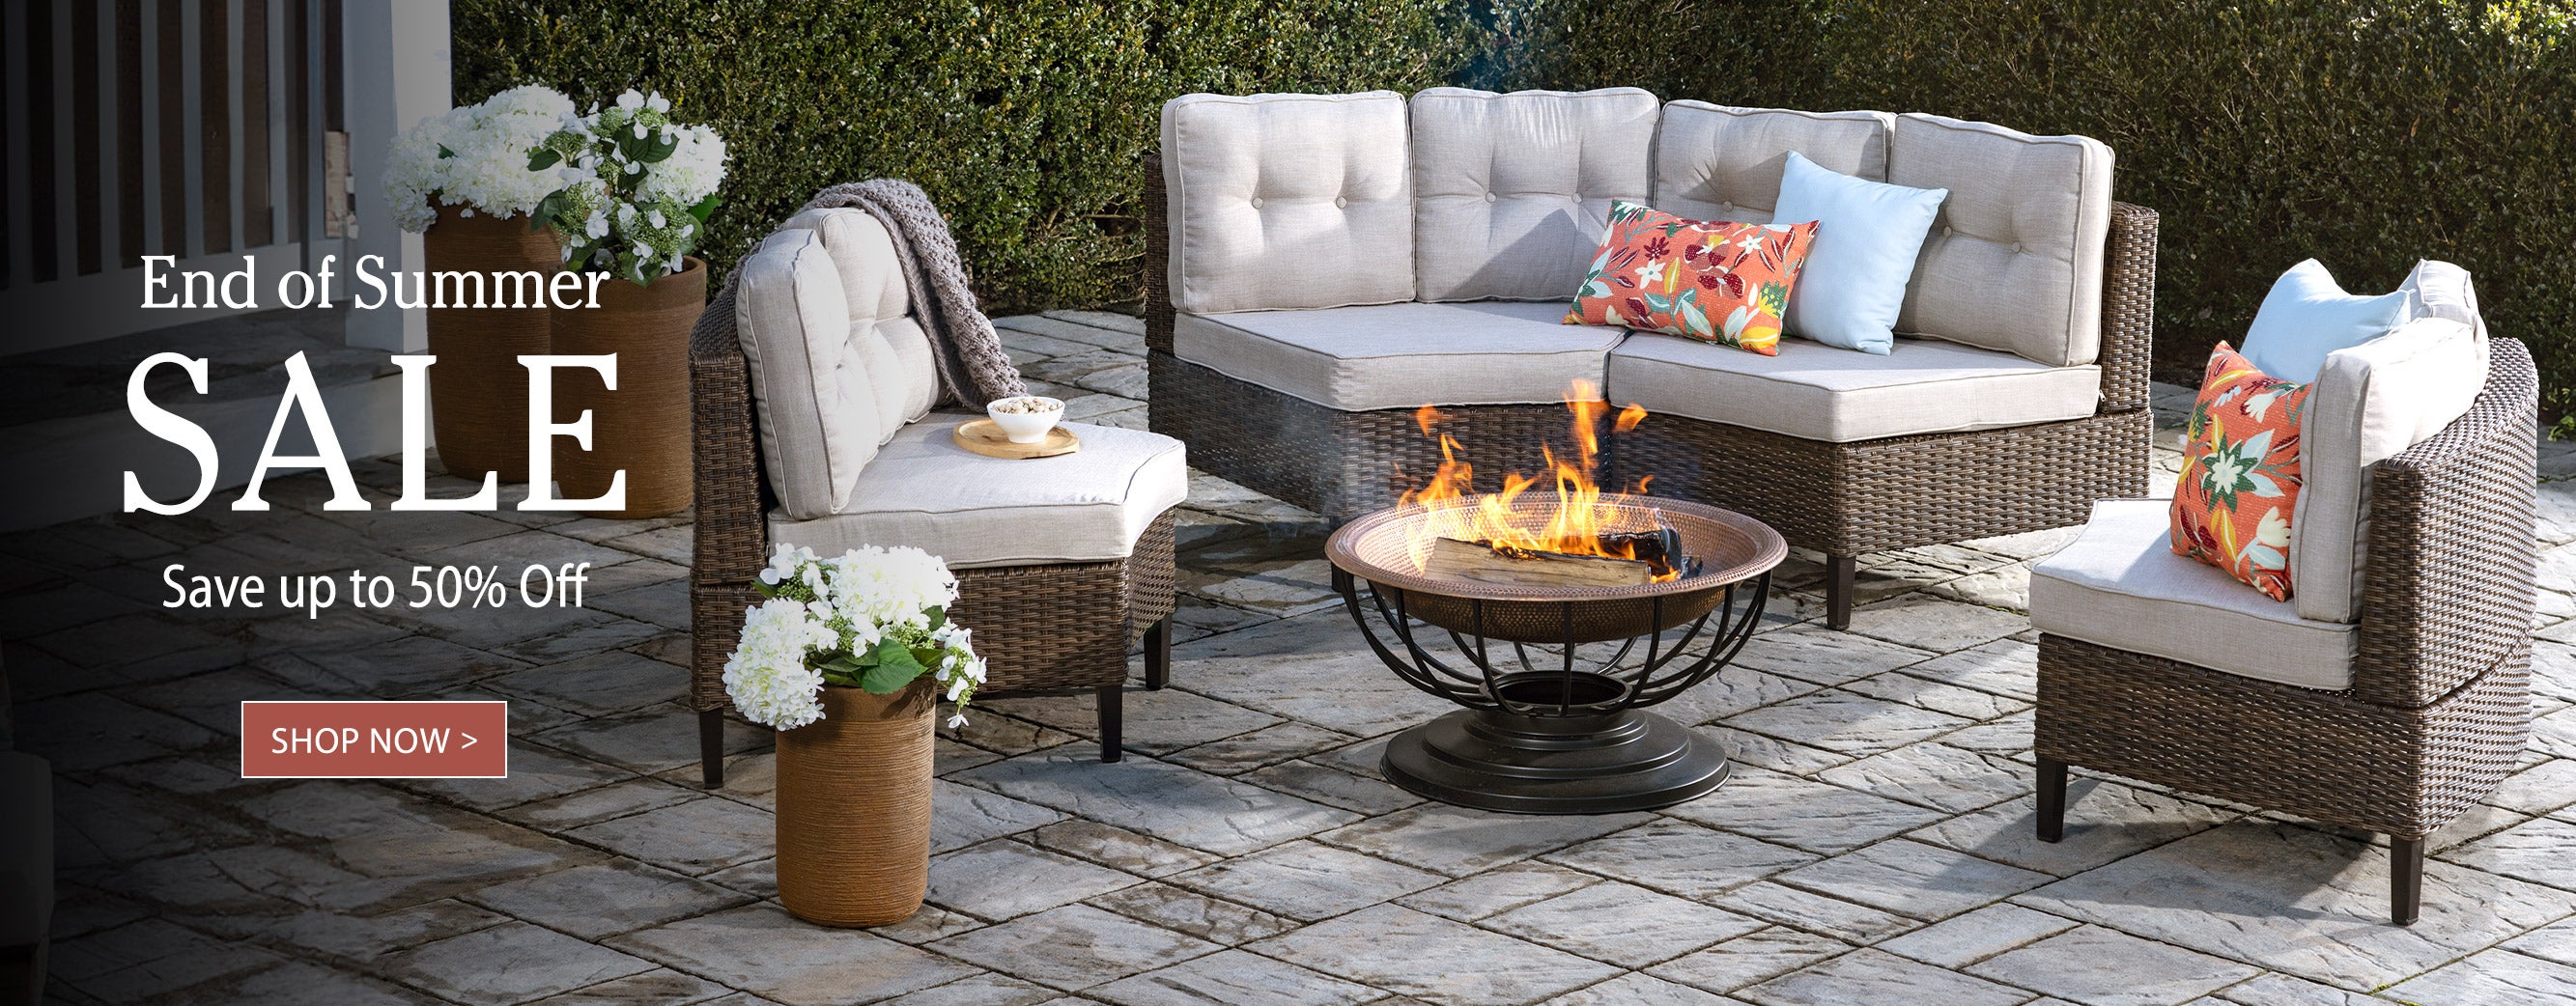 Image of Kingwood 5 Piece Outdoor seating set on patio. End of Summer SALE Save up to 50% off